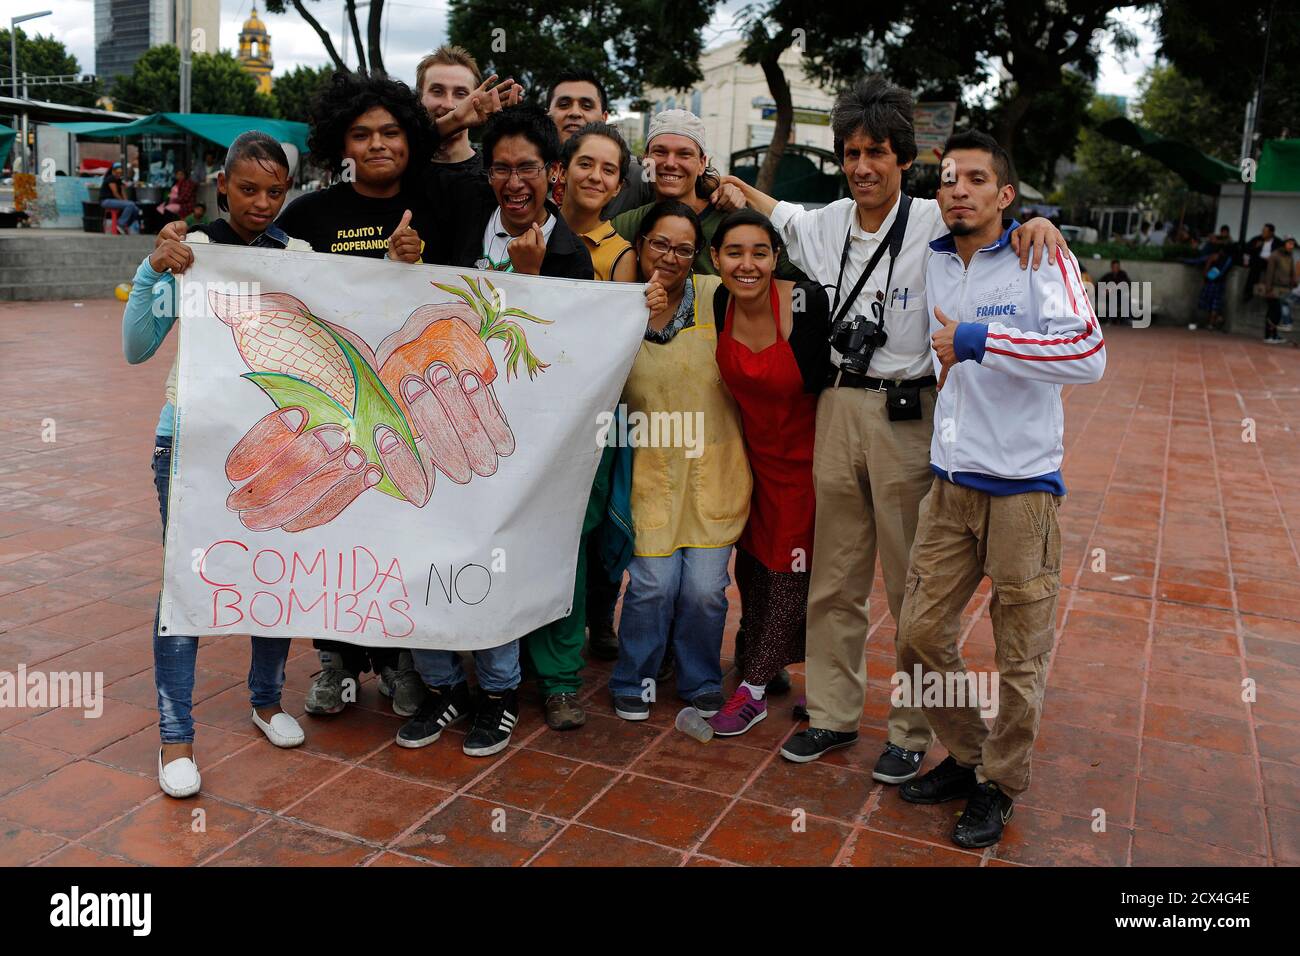 Activists of Comida No Bombas (Food, Not Bombs) and homeless people pose for a picture at Francisco Zarco plaza in Mexico City August 25, 2013. Comida No Bombas collects unwanted produce which is still edible from private donations, markets and shops, and distributes them freely as cooked dishes to the public in over a thousand cities around the world, as a form of protest against war, poverty and the destruction of the environment. Picture taken August 25, 2013. REUTERS/Tomas Bravo (MEXICO - Tags: SOCIETY FOOD POVERTY) Stock Photo